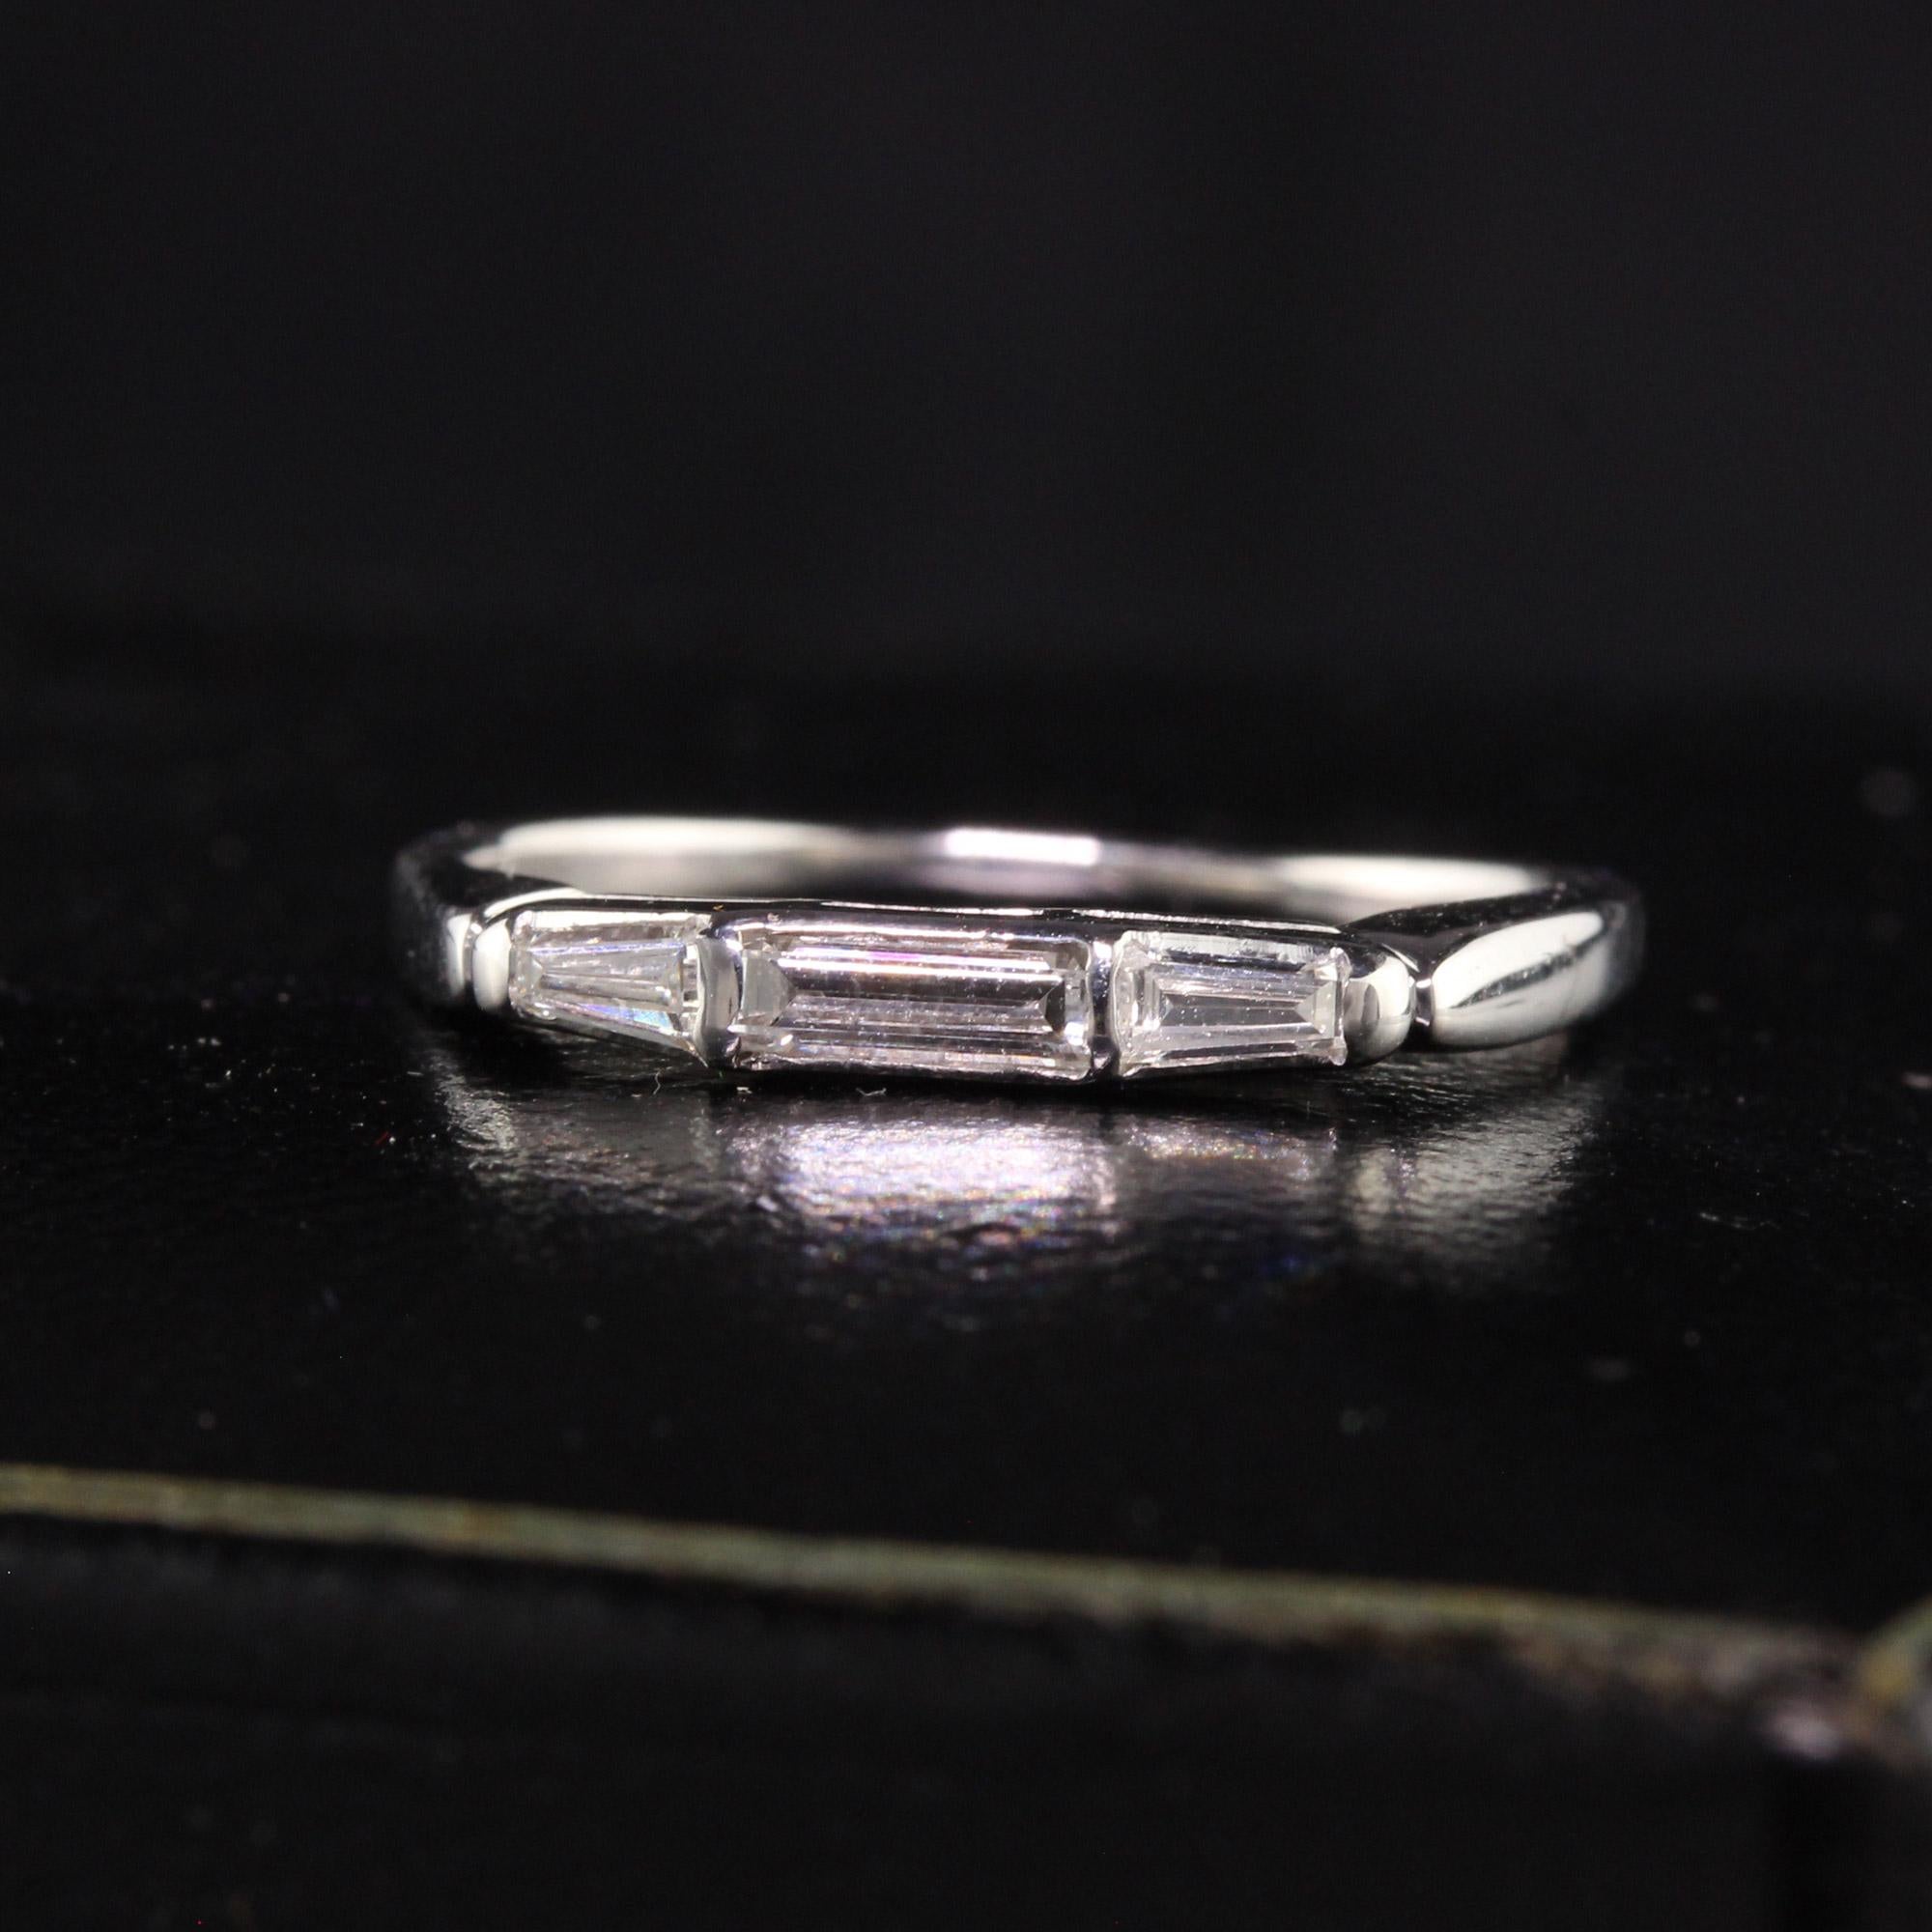 Beautiful Vintage Estate 14K White Gold Baguette Diamond Three Stone Band. This classic band features three baguette diamonds on the top set in 14K white gold. It can be worn with an engagement ring or by itself.

Item #R1105

Metal: 14K White